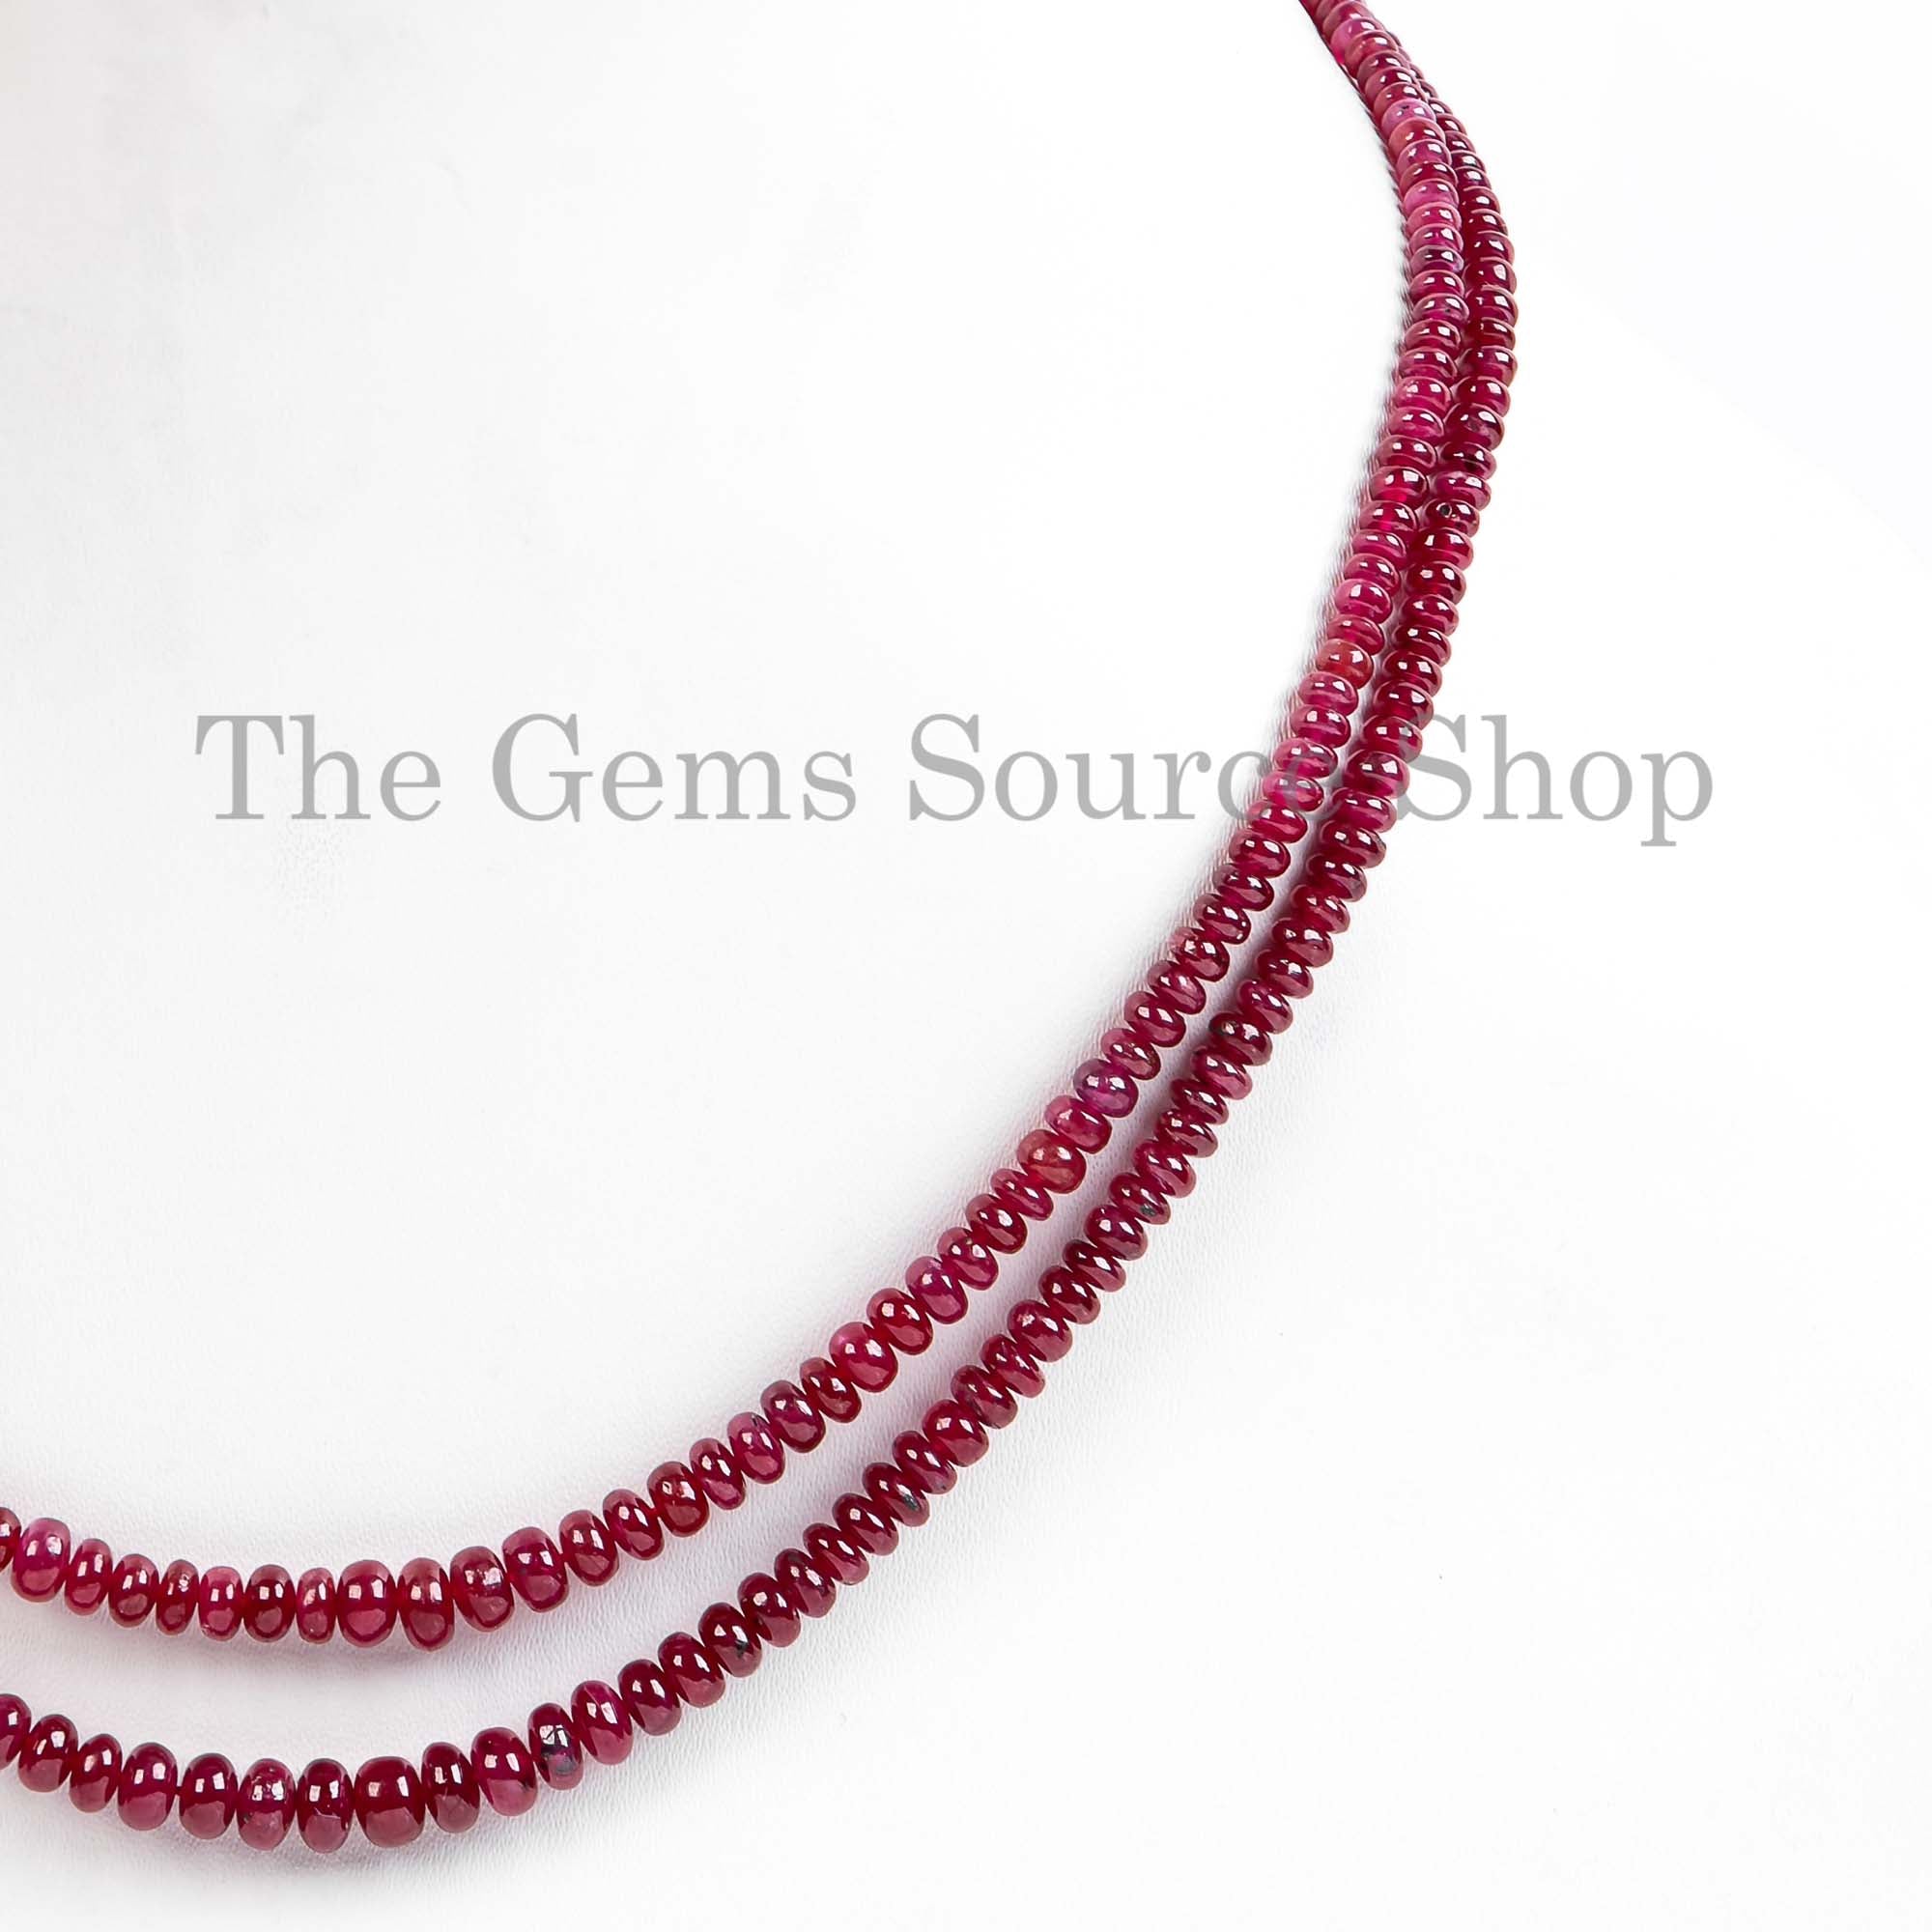 Ruby Smooth Necklace, Beads Necklace, AAA Quality Ruby Necklace, Rondelle Necklace